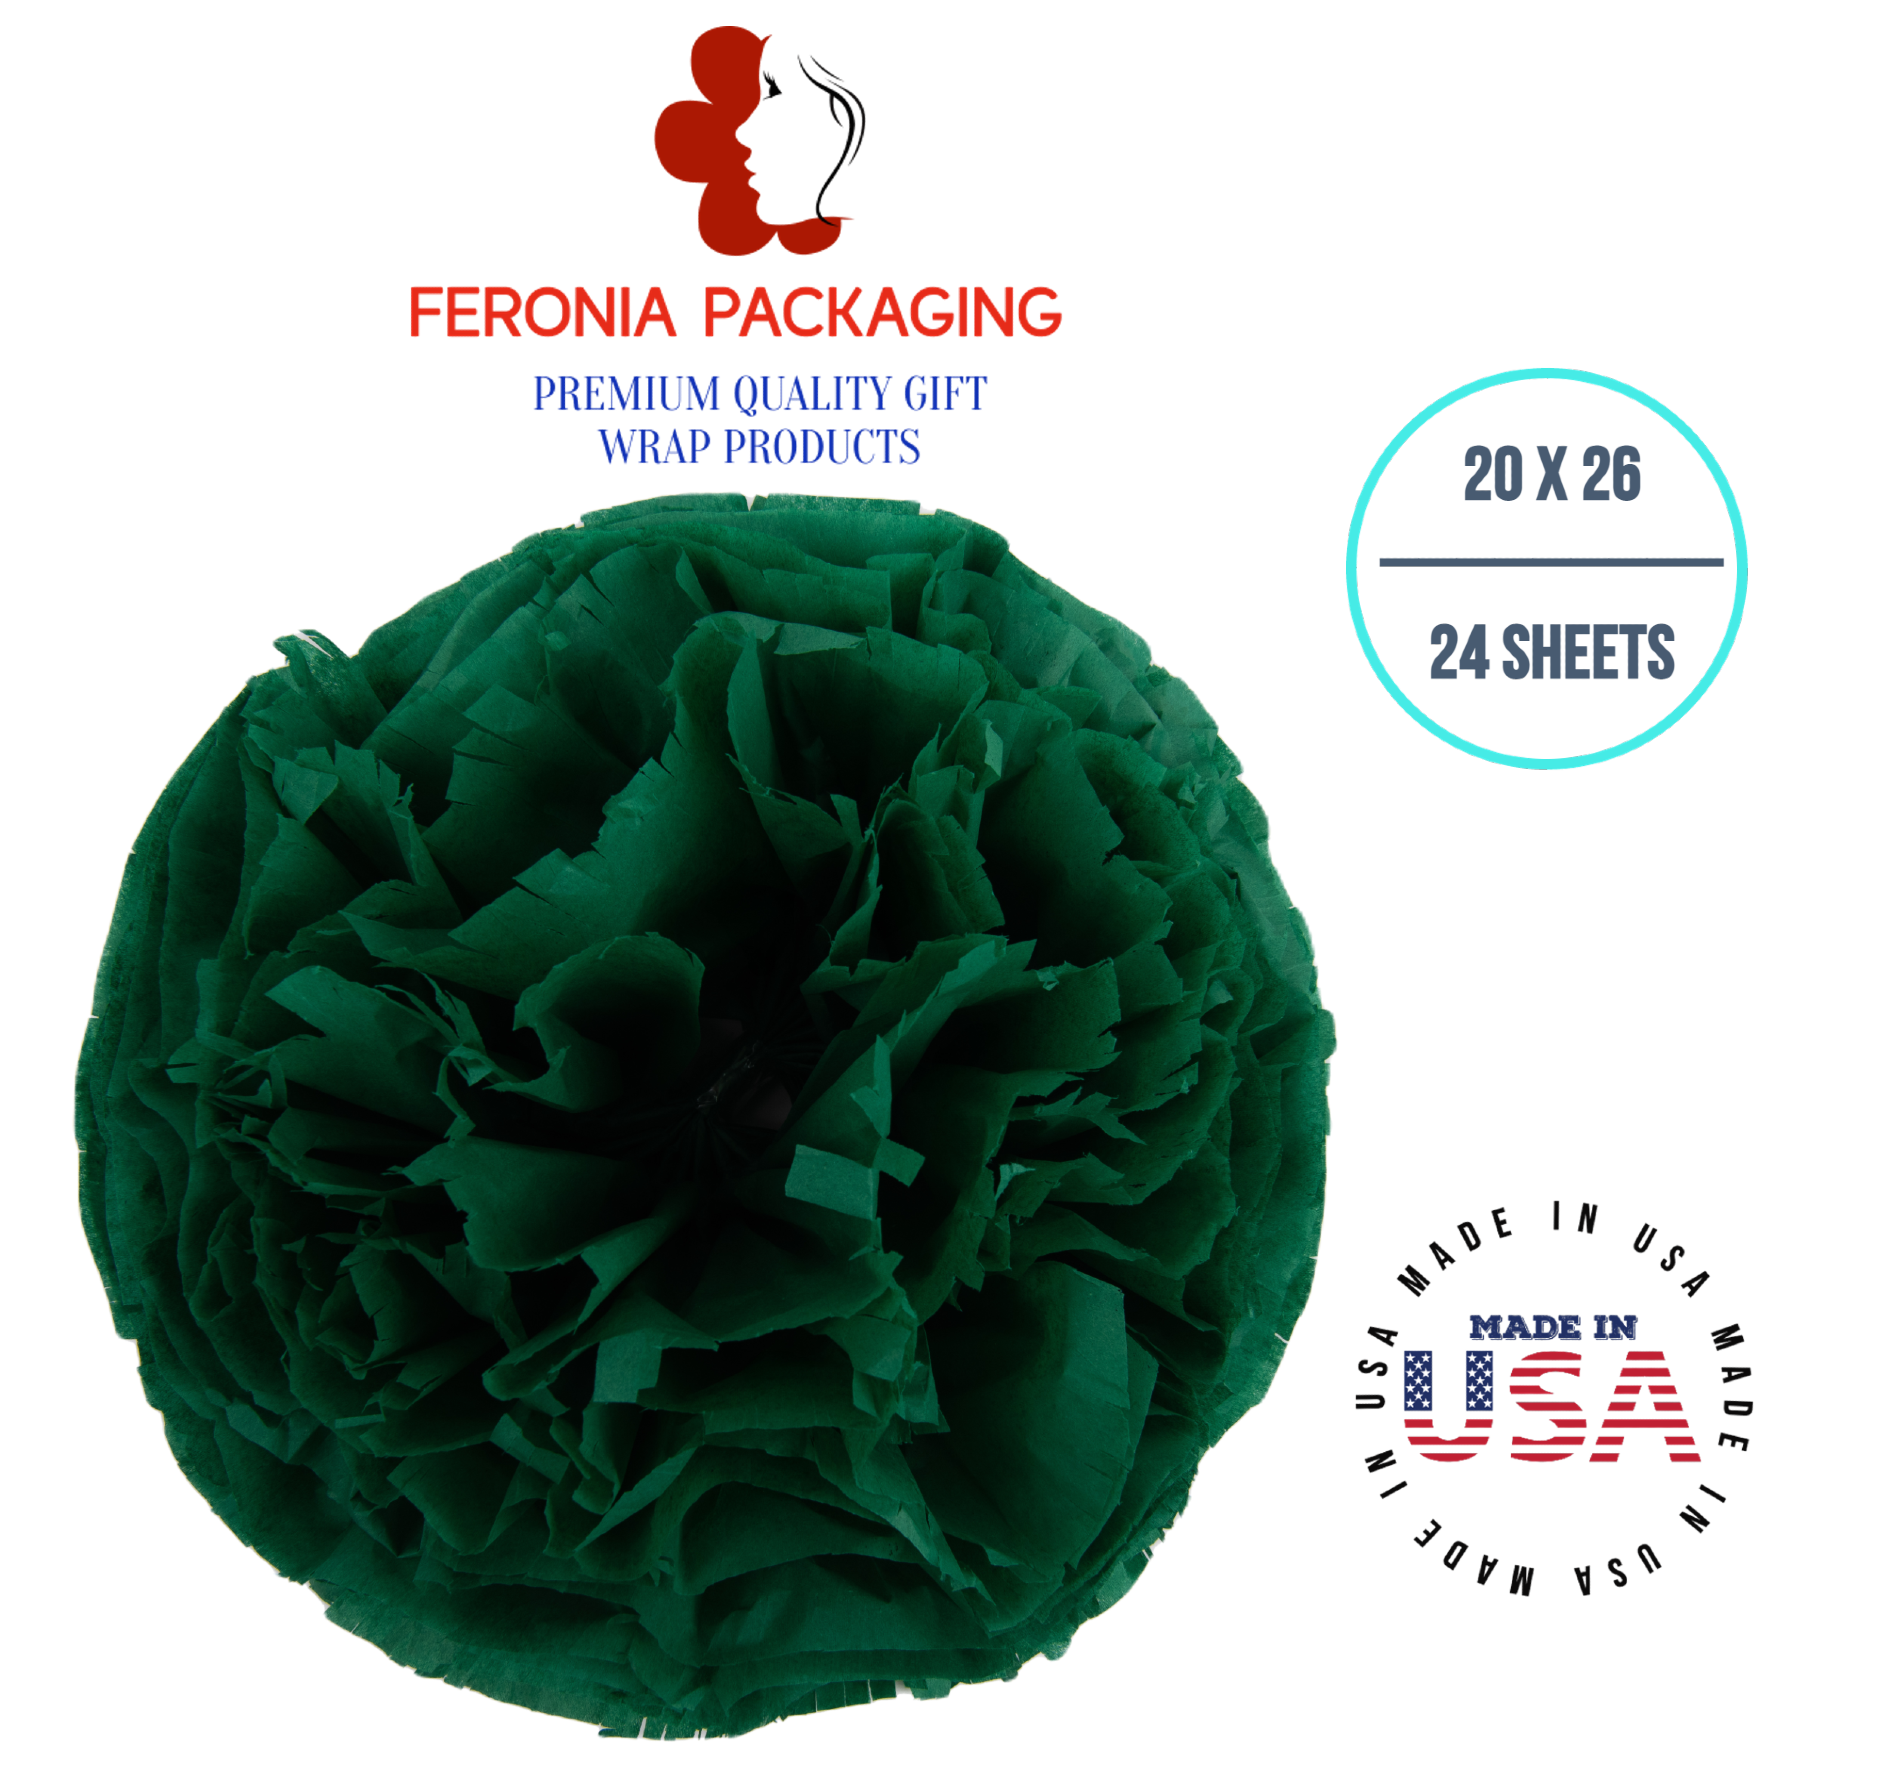 Teal Tissue Paper Squares, Bulk 24 Sheets, Premium Gift Wrap and Art  Supplies for Birthdays, Holidays, or Presents by Feronia packaging, Large  20 Inch